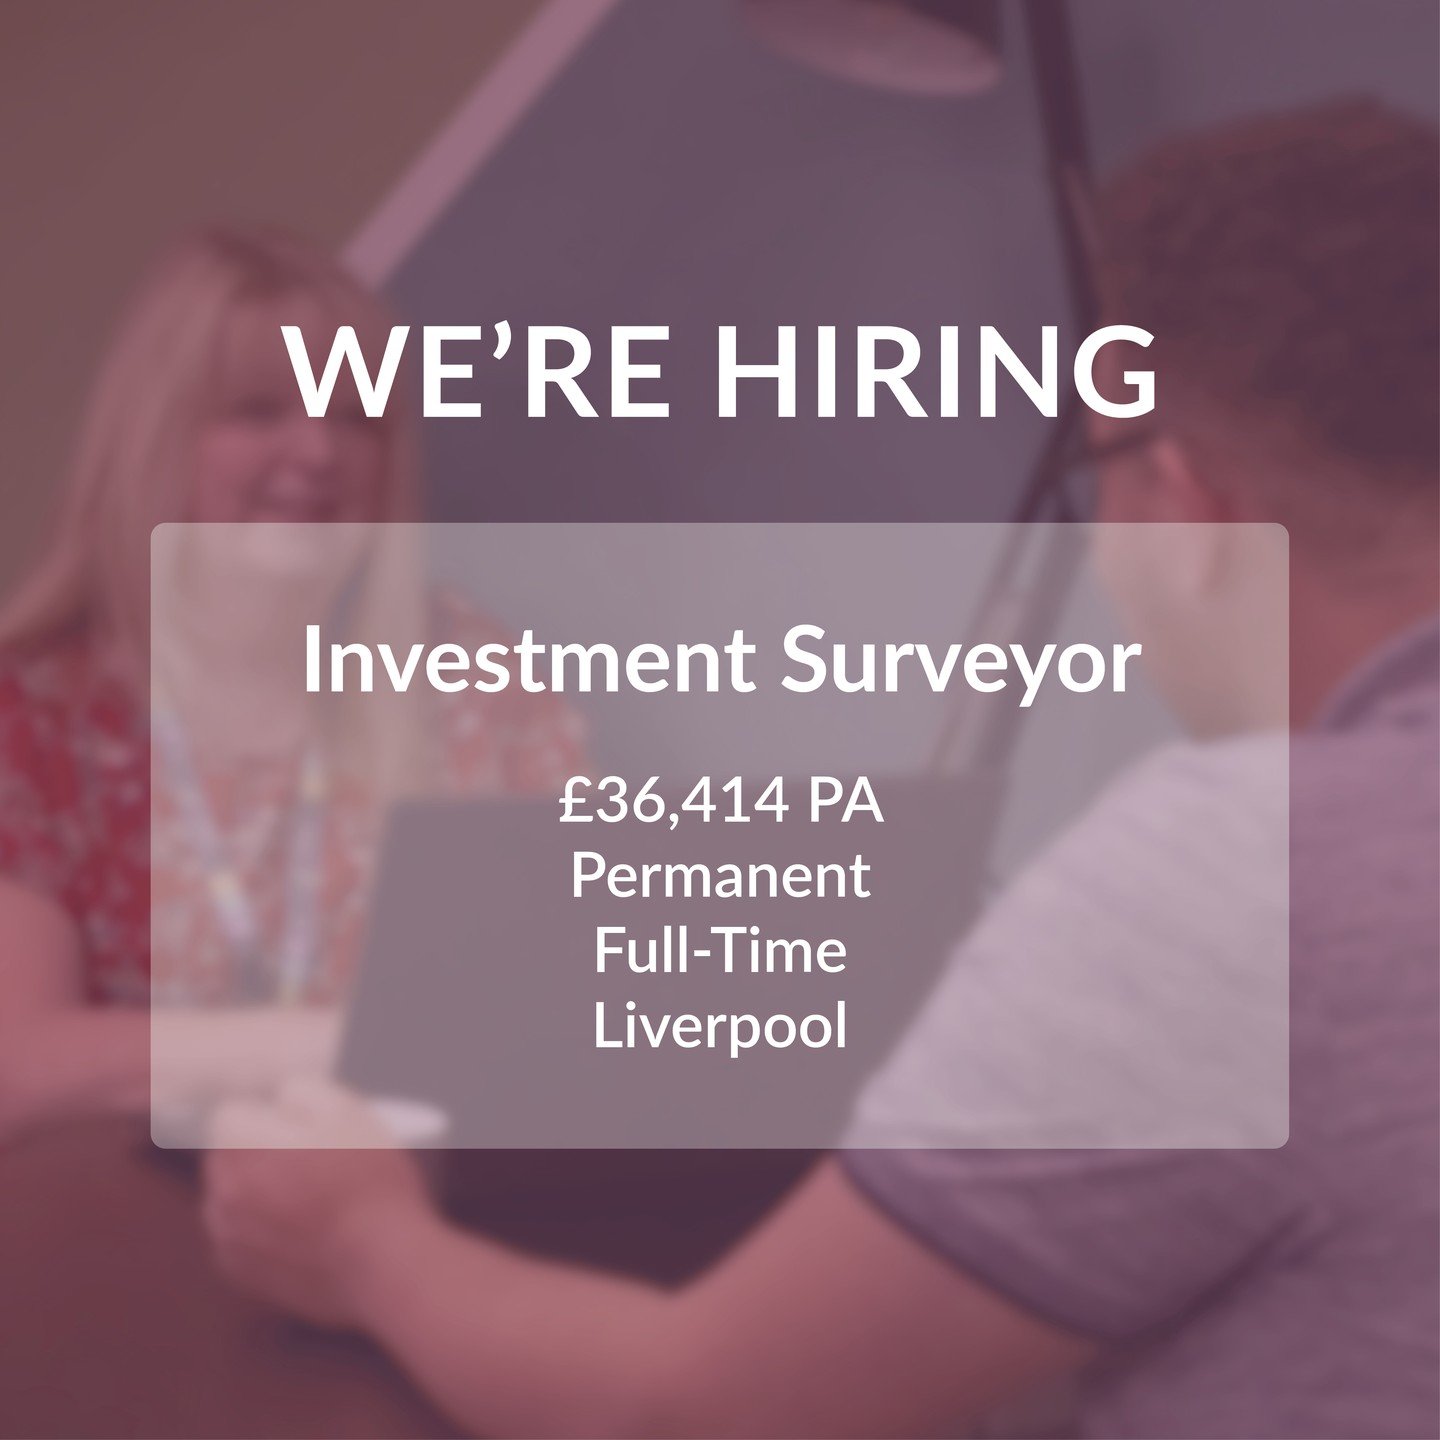 We're #Hiring | Investment Surveyor 📢 

As an Investment Surveyor, you will support the Repairs Manager in executing the planned investment programme following HSE regulations. #UKHousing 

Use the link in our bio to find out more.